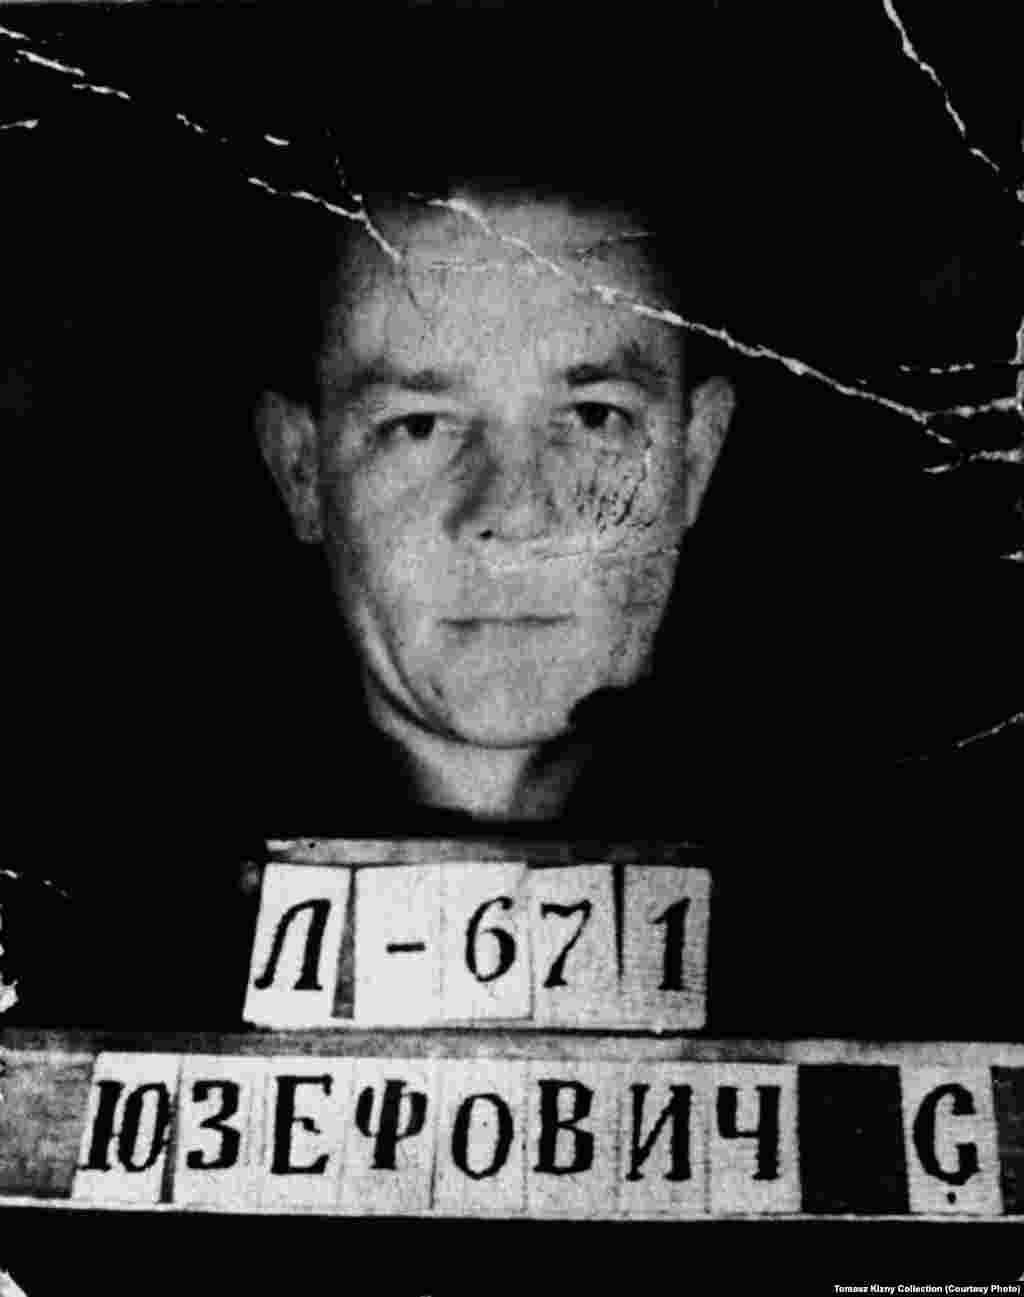 An undated photo of Polish Home Army soldier Stefan Jozefowicz, who was arrested by the Soviet secret police in 1945 and sentenced to death. That sentence was later commuted to 20 years of hard labor. In 1953, Jozefowicz participated in a prisoner strike at mine No. 29. He returned to Poland in 1956.